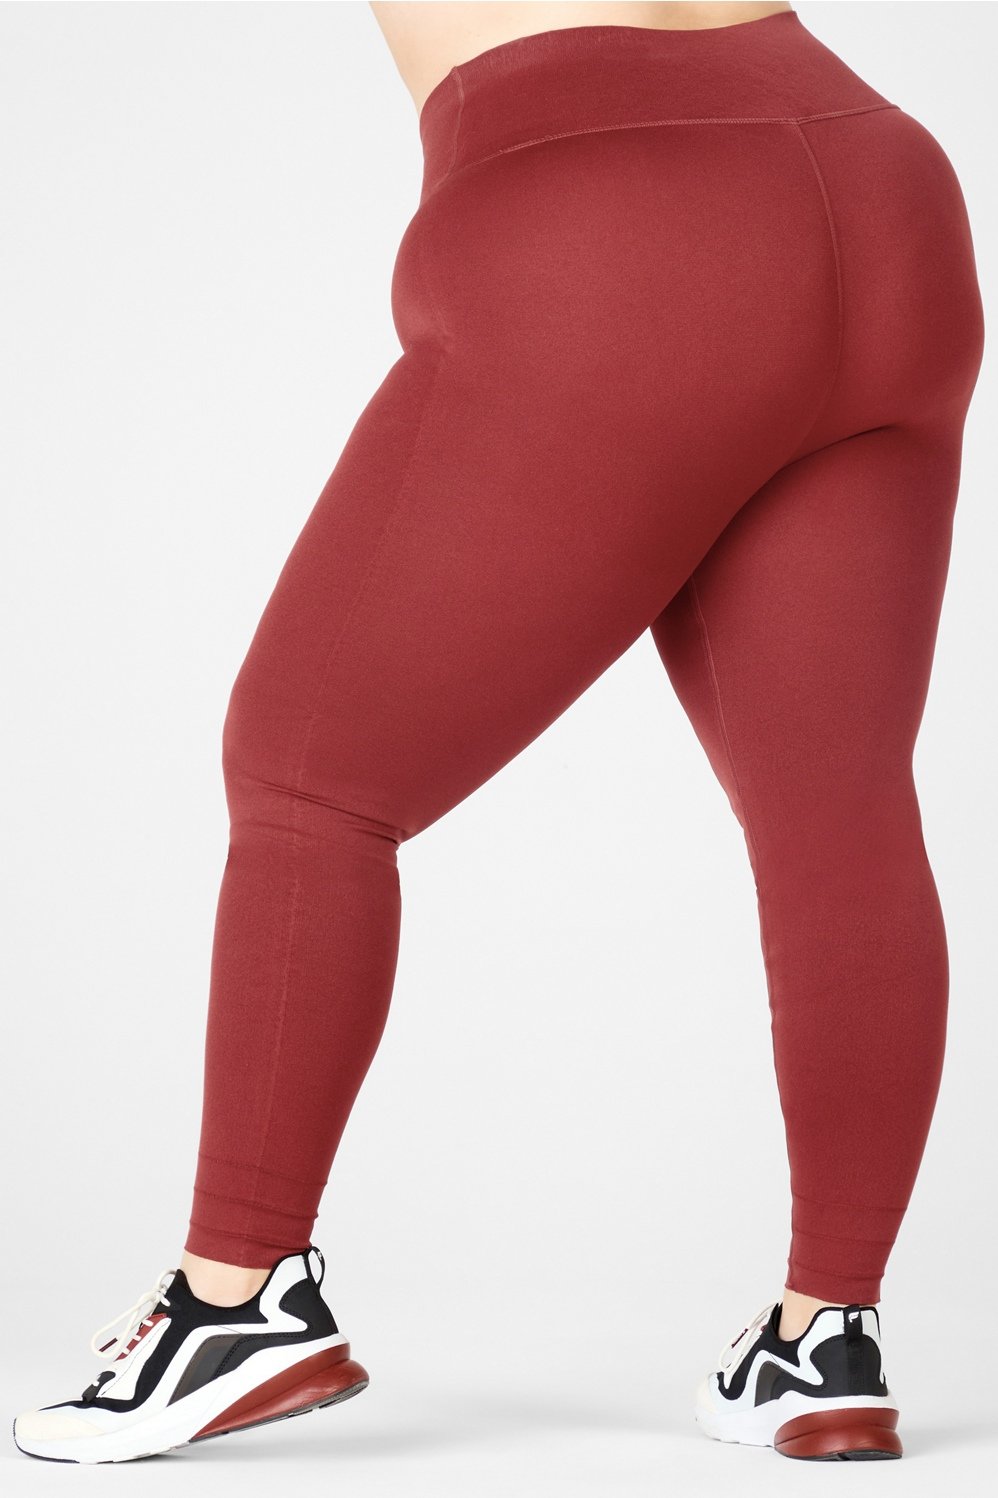 NWT Fabletics High Waisted Sculptknit Statement Red Leggings Pants Size XS  2-4